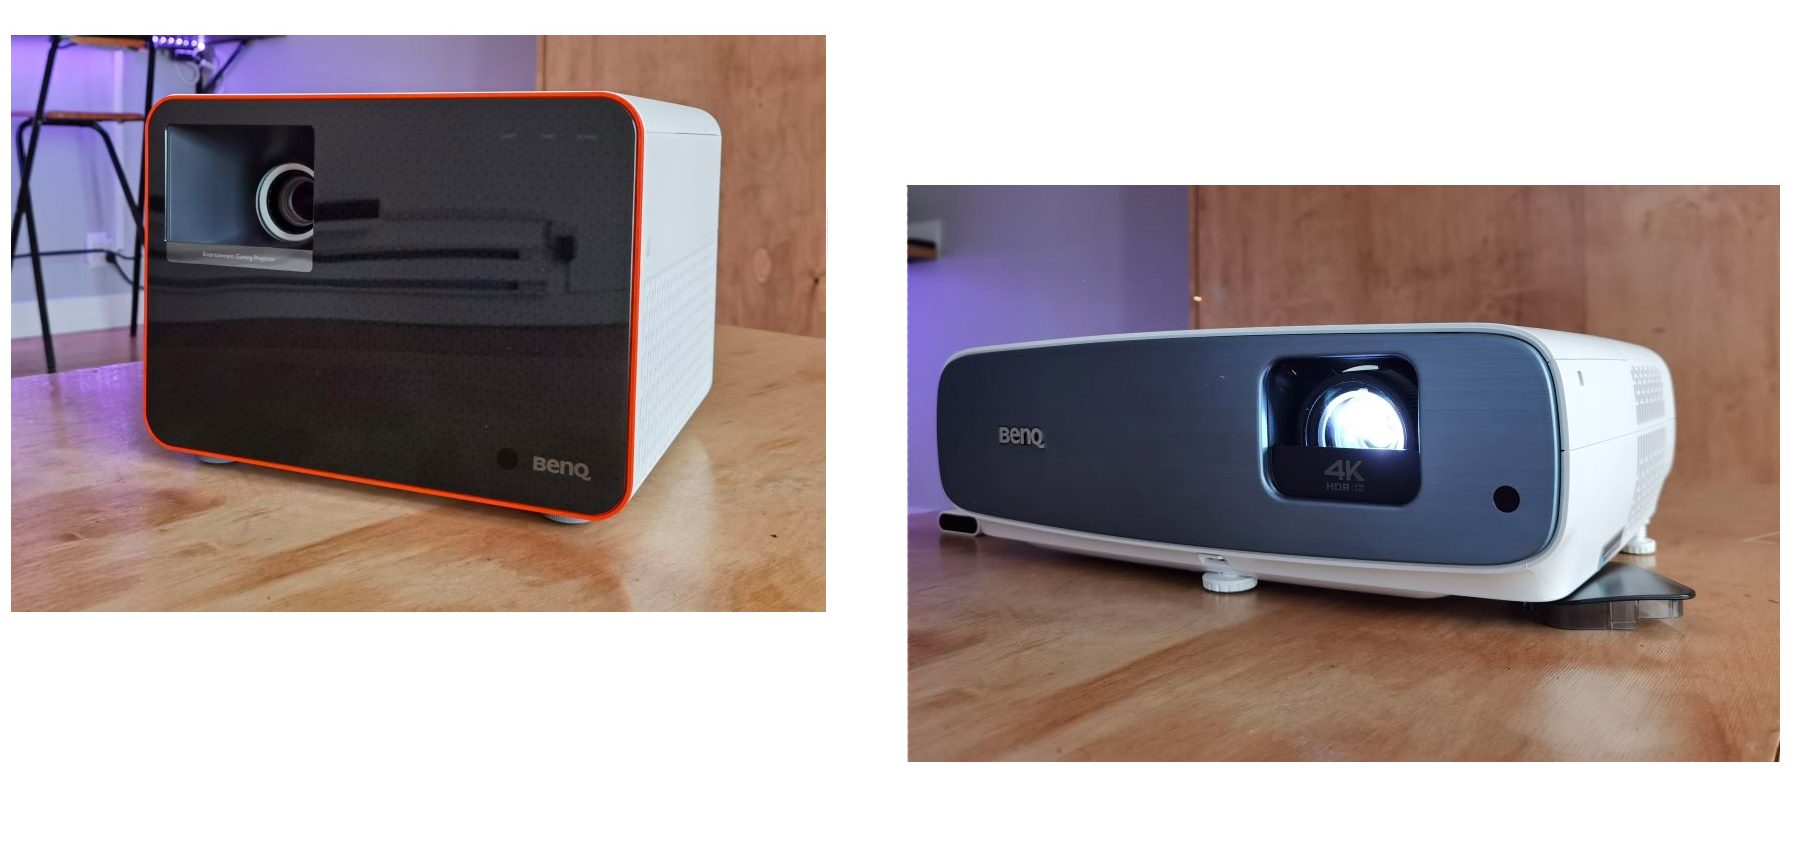 BenQ projectors for a summer sports viewing party image